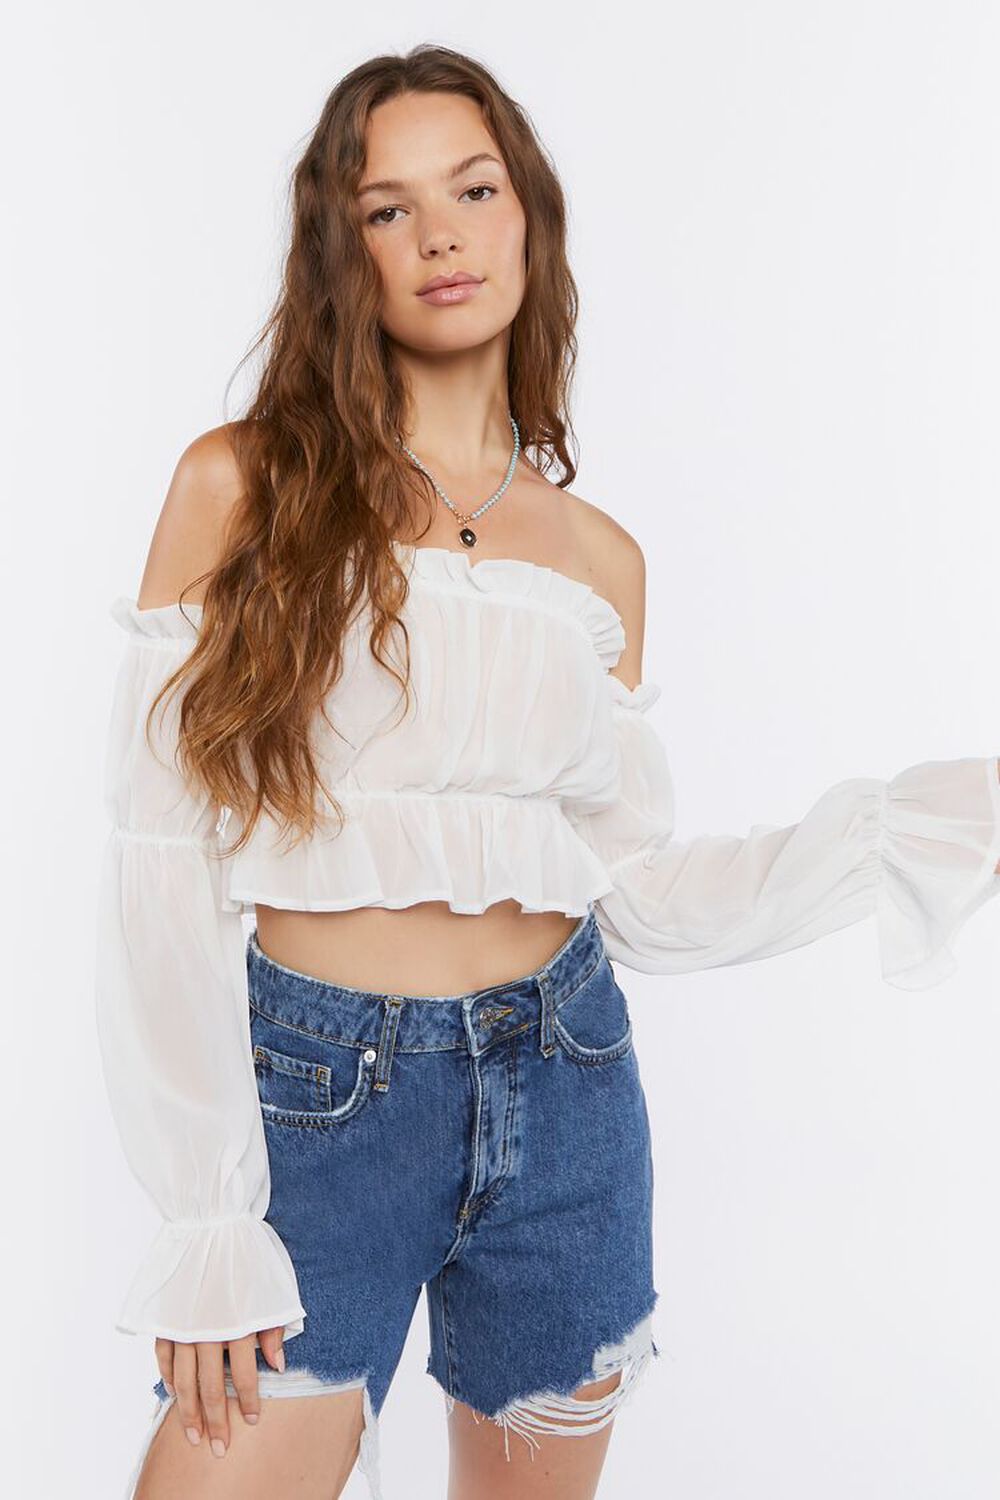 IVORY Ruffle Off-the-Shoulder Crop Top, image 1